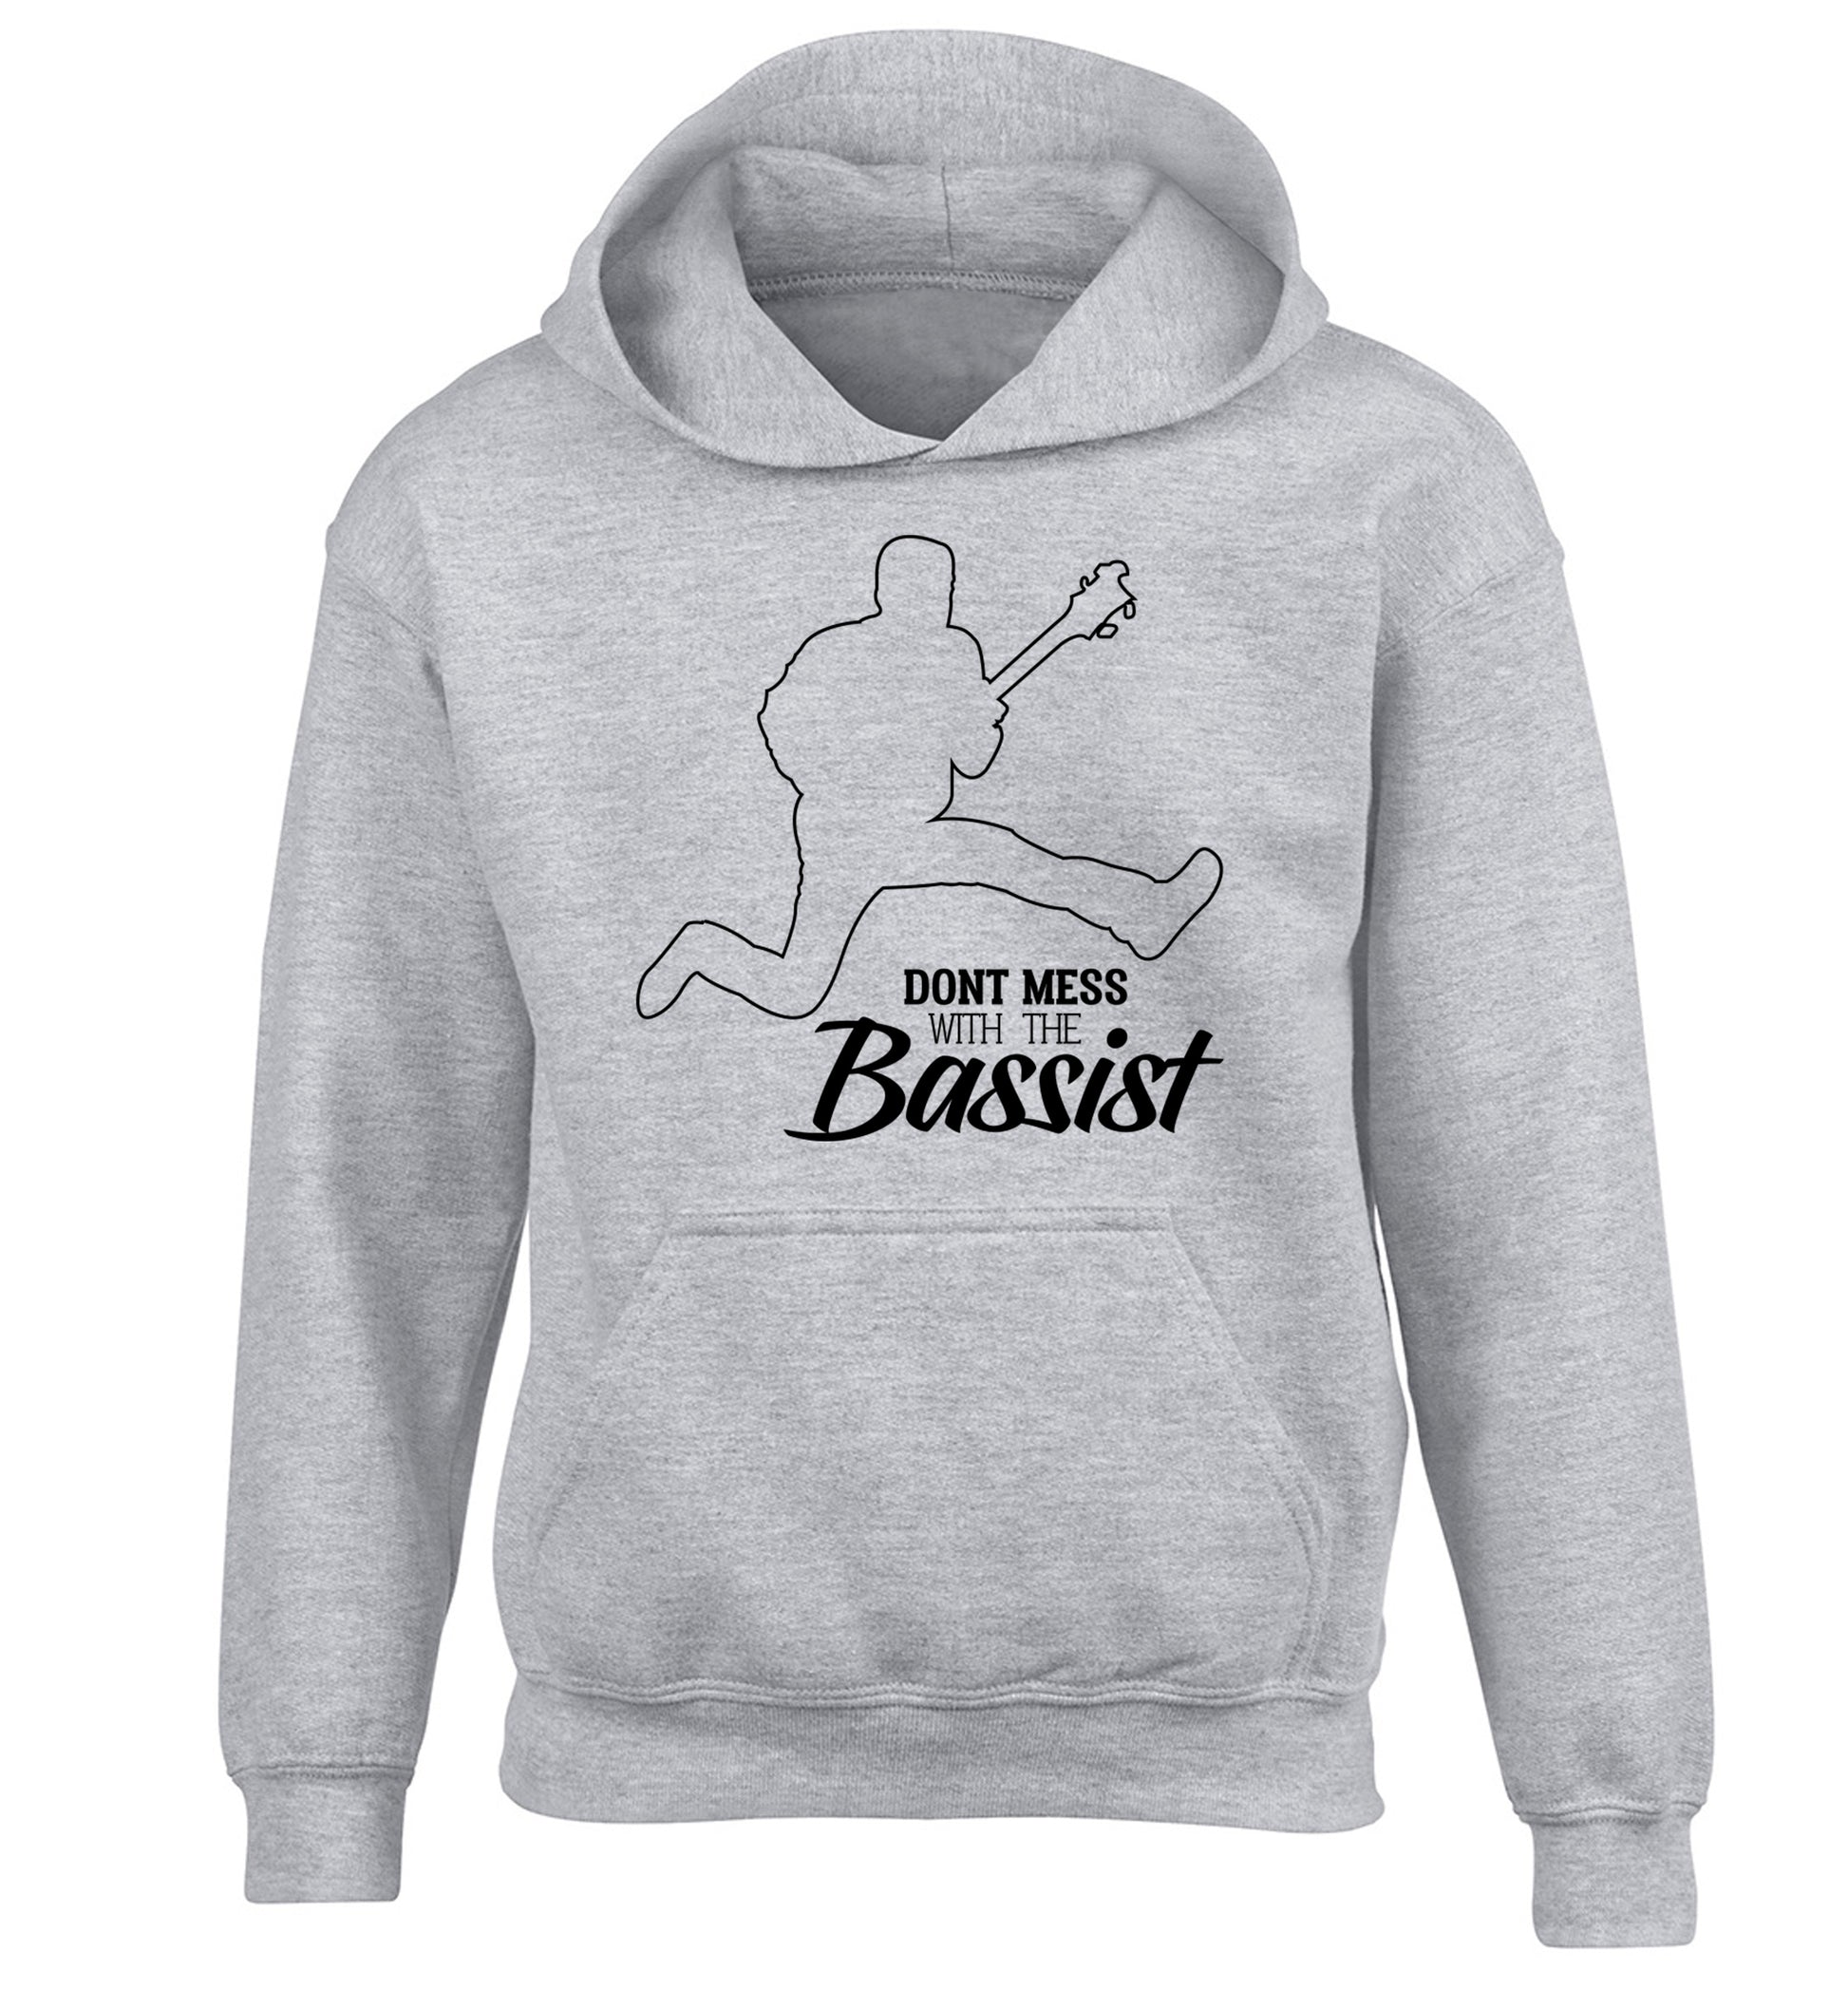 Dont mess with the bassist children's grey hoodie 12-13 Years